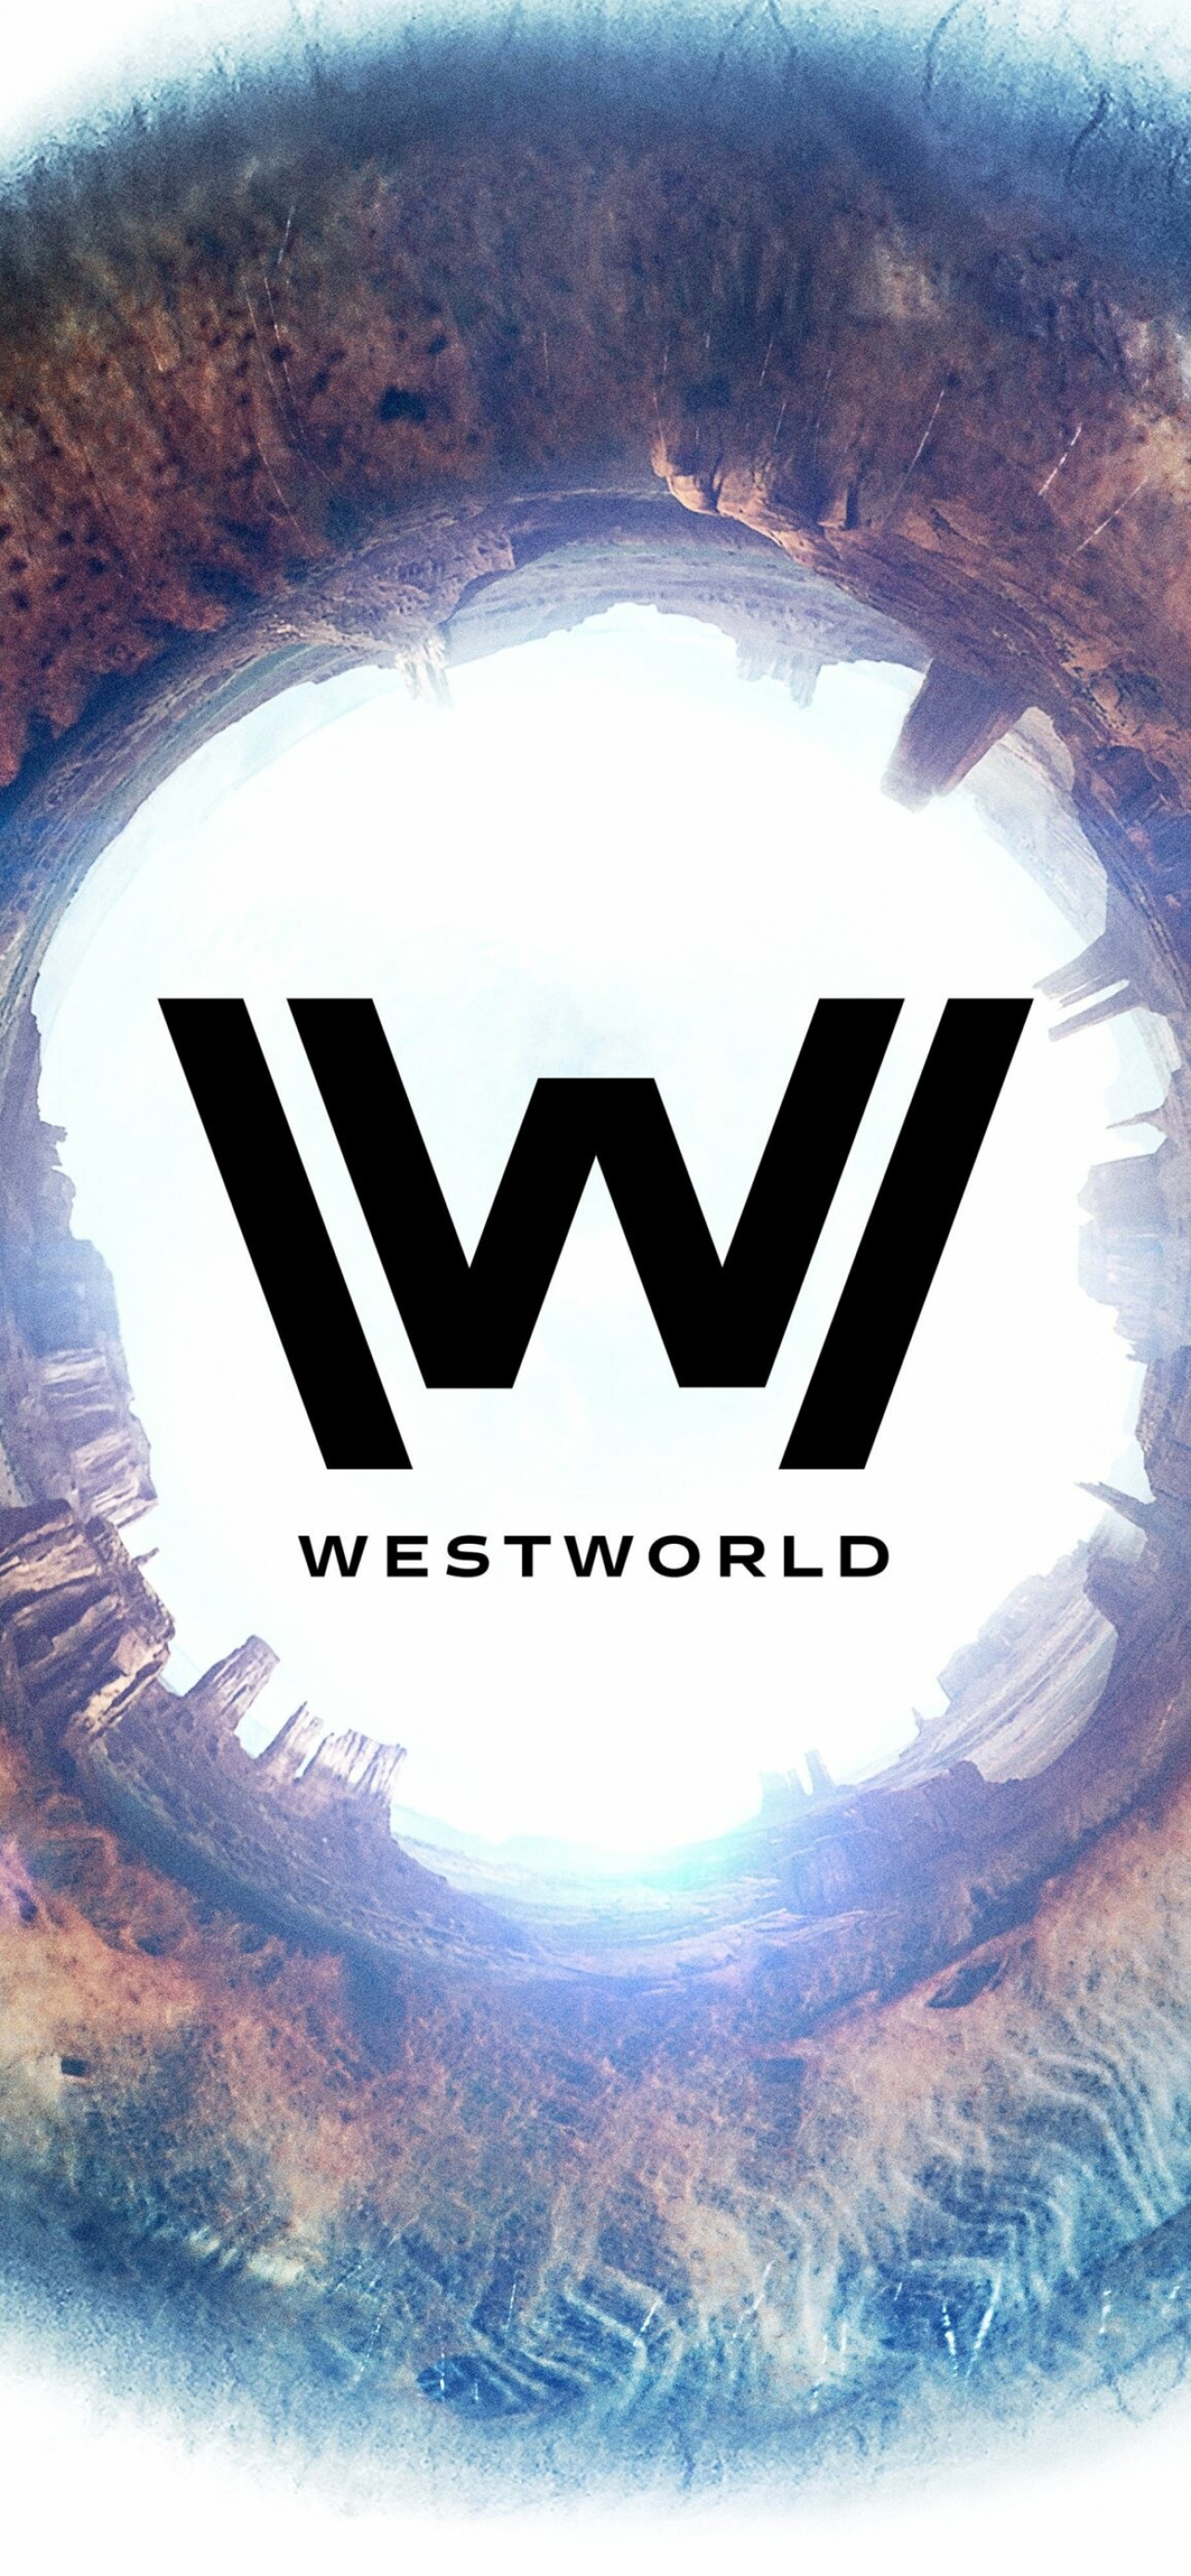 Westworld: A fictional, technologically advanced Wild-West-themed amusement park populated by android "hosts". 1290x2780 HD Wallpaper.